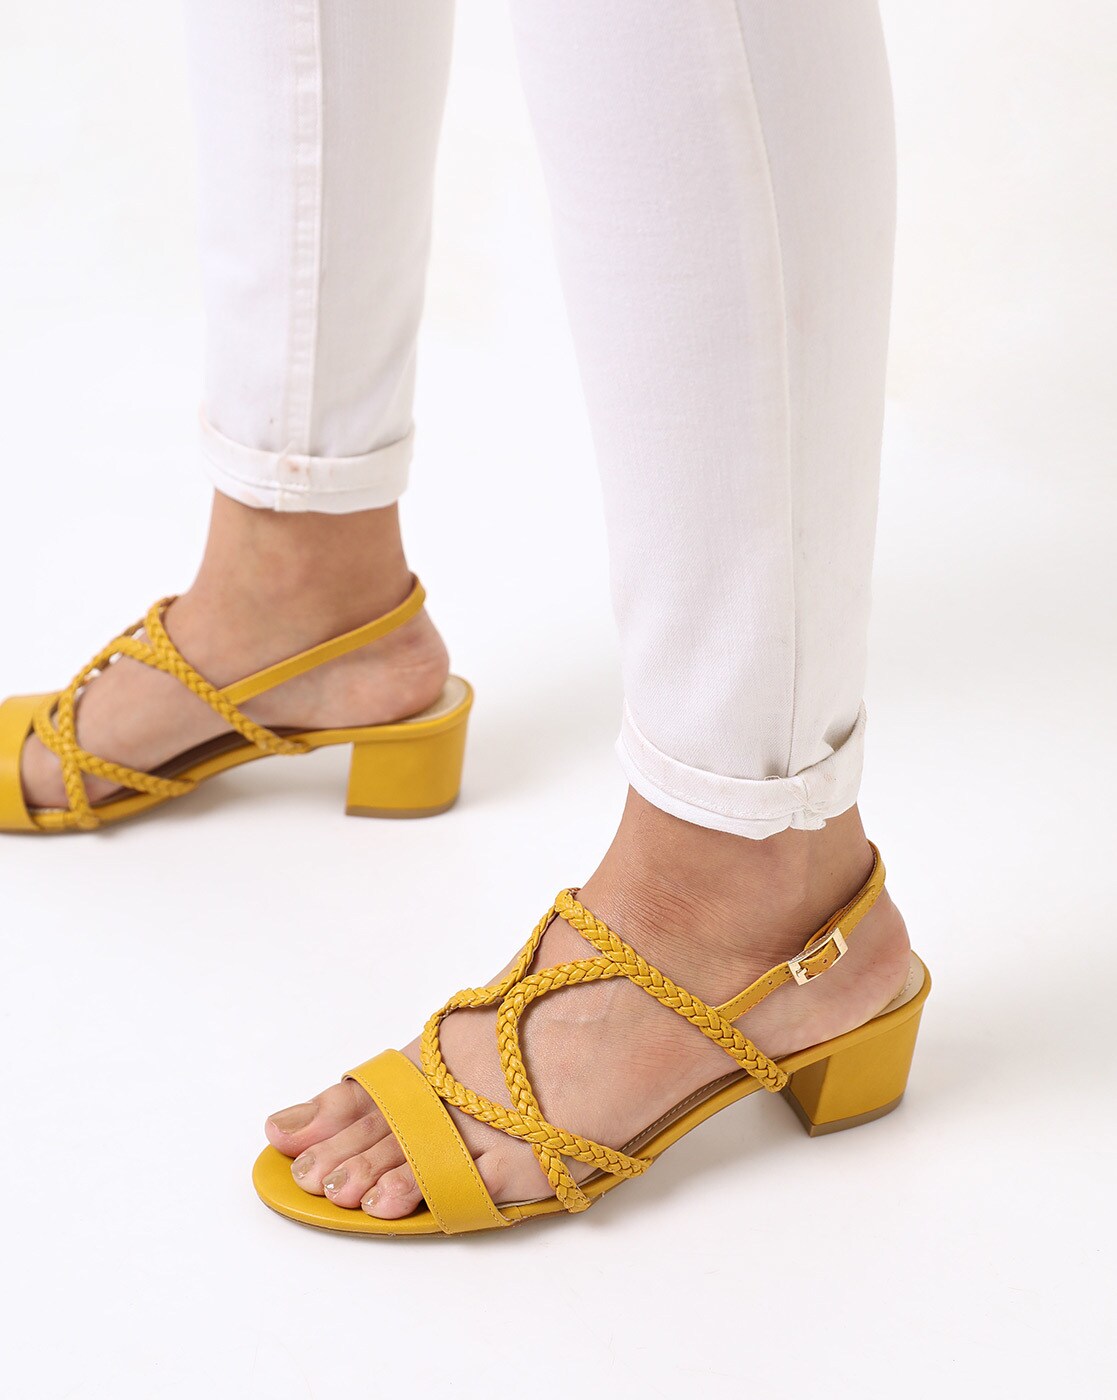 Buy Mustard Yellow Heeled Sandals for 